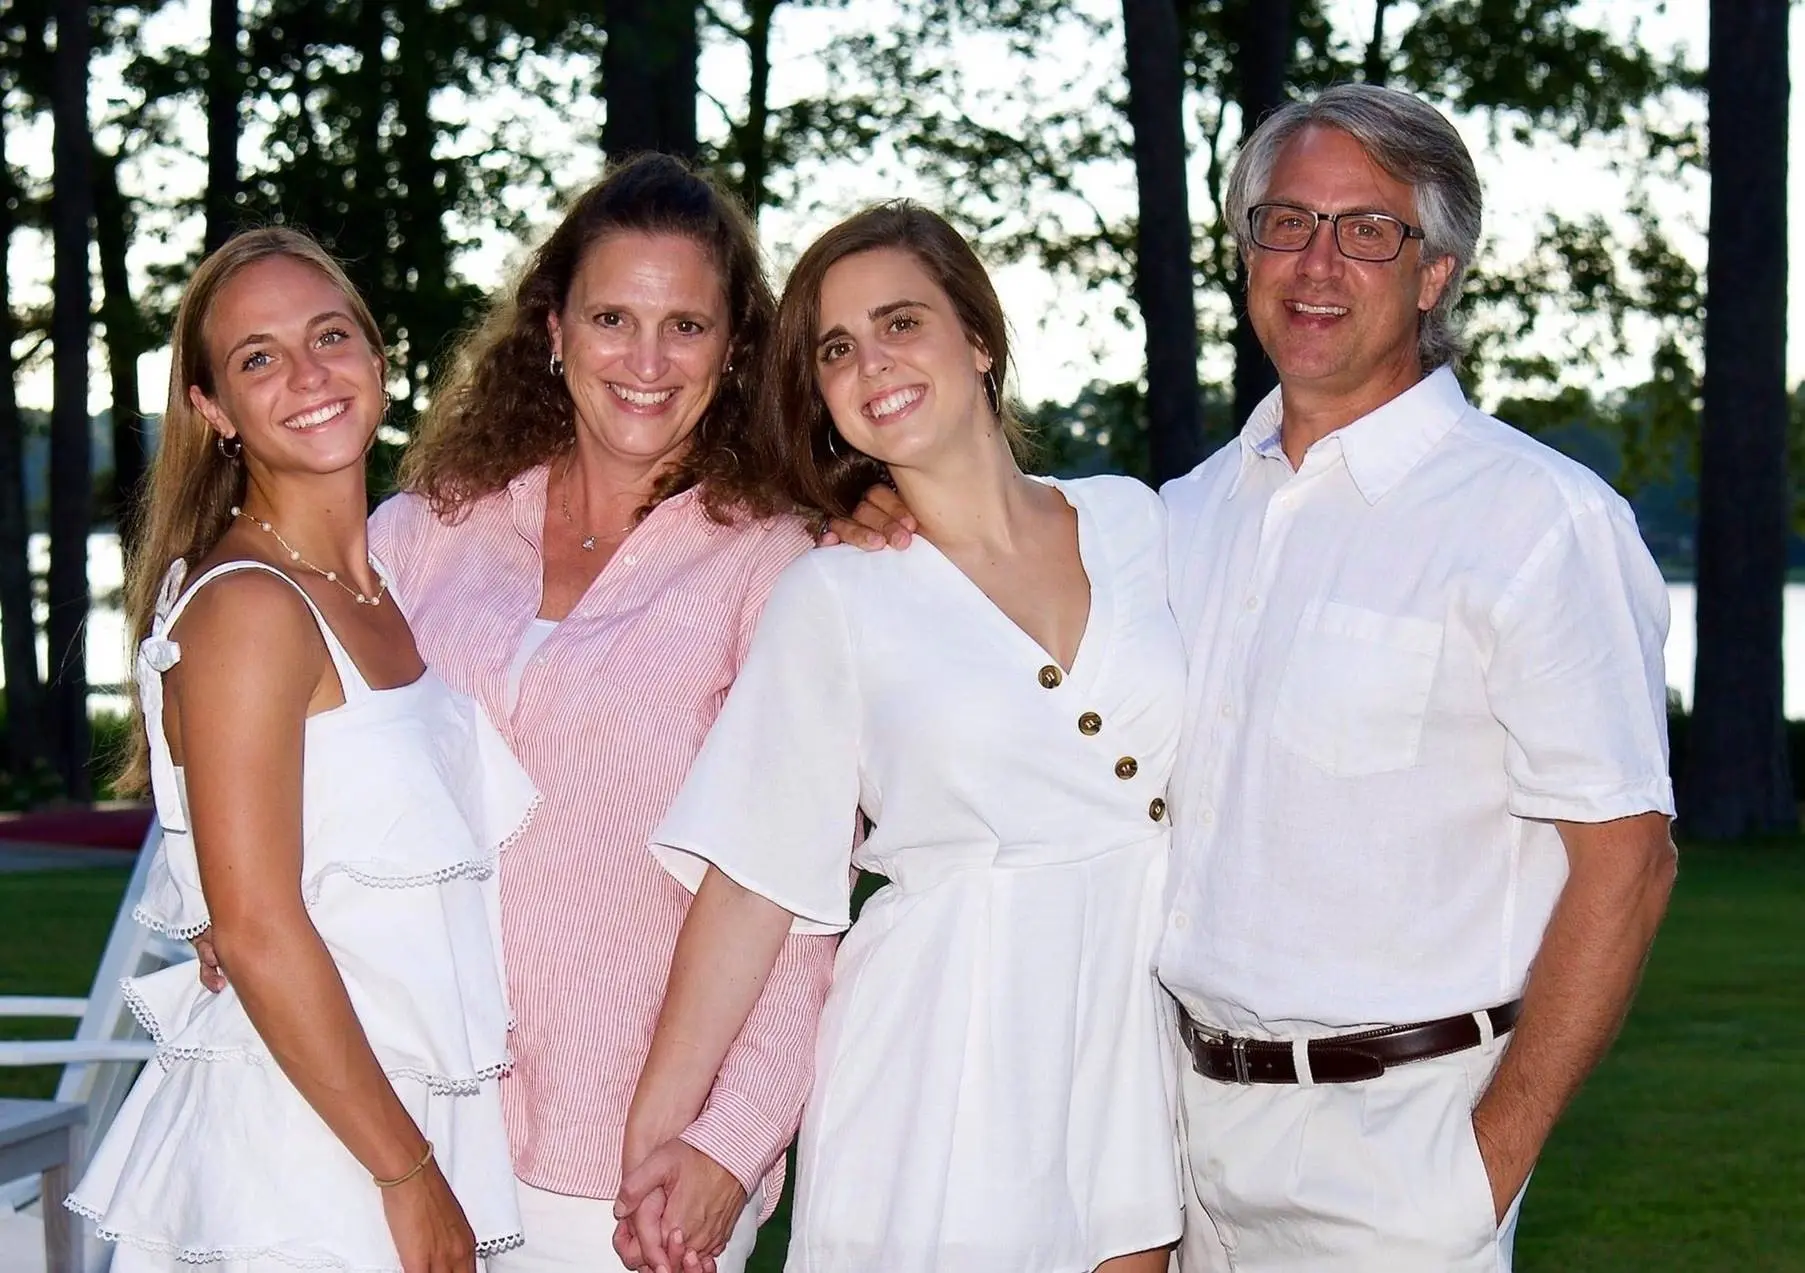 Todd Antonick pictured alongside his wife and two daughters.